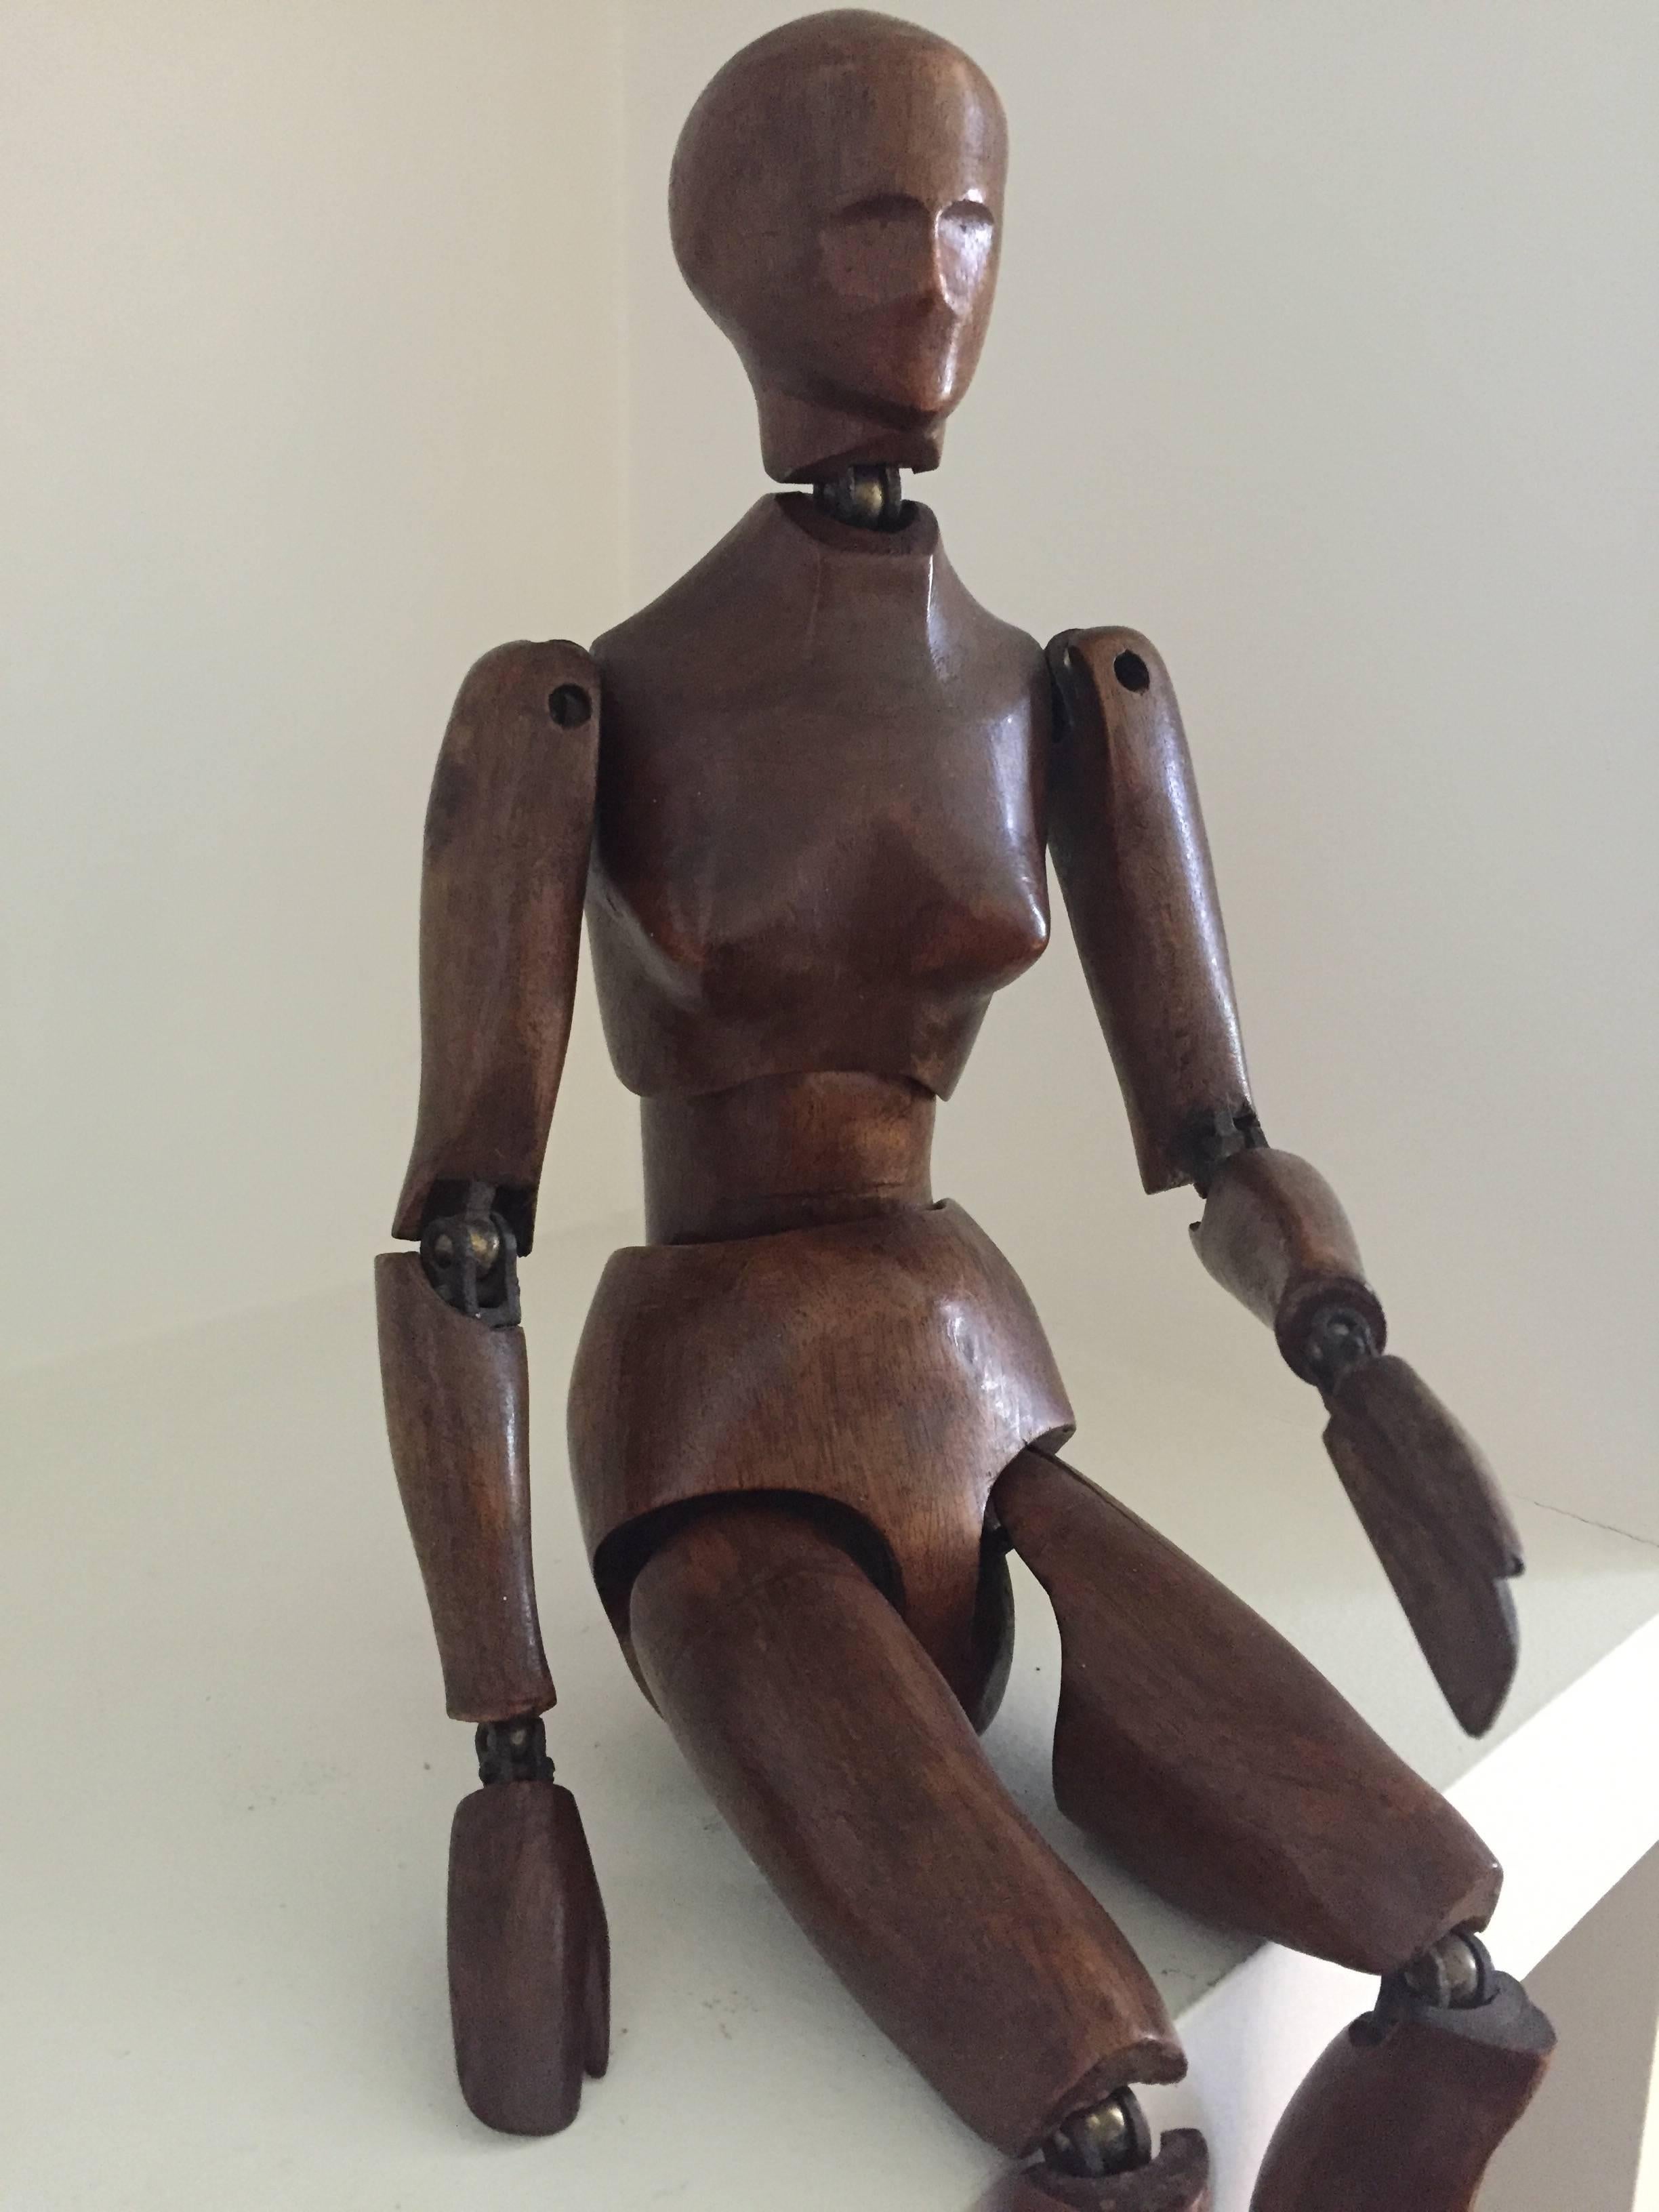 Polished Female Lay Figure or Artists Mannequin, 19th Century